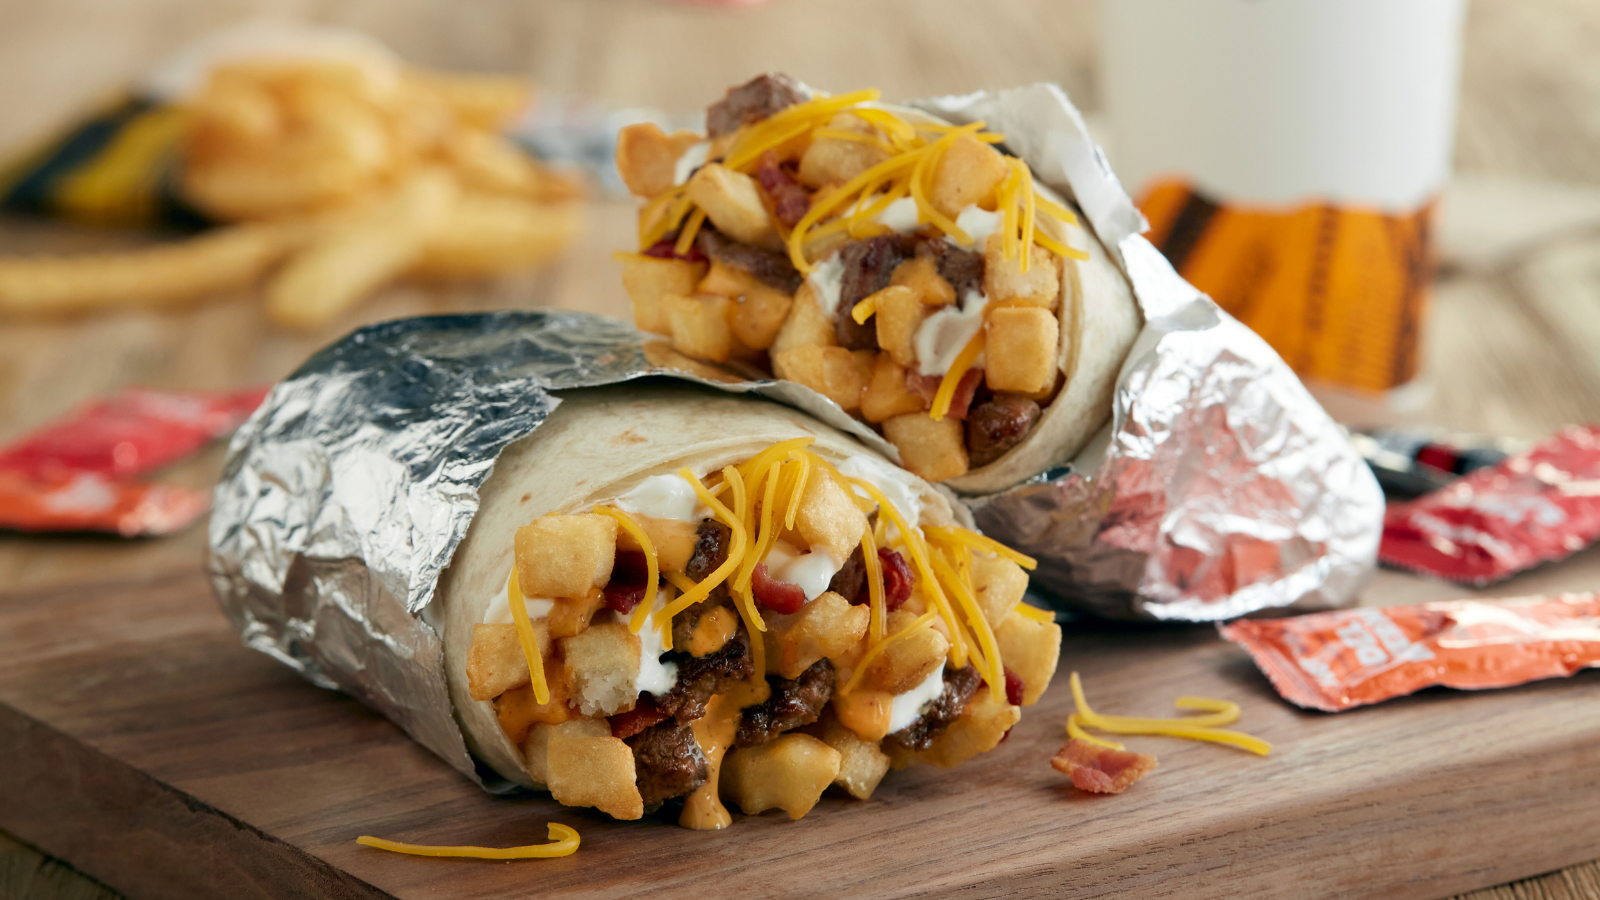 5 Best Burrito Franchises for Convenience Stores